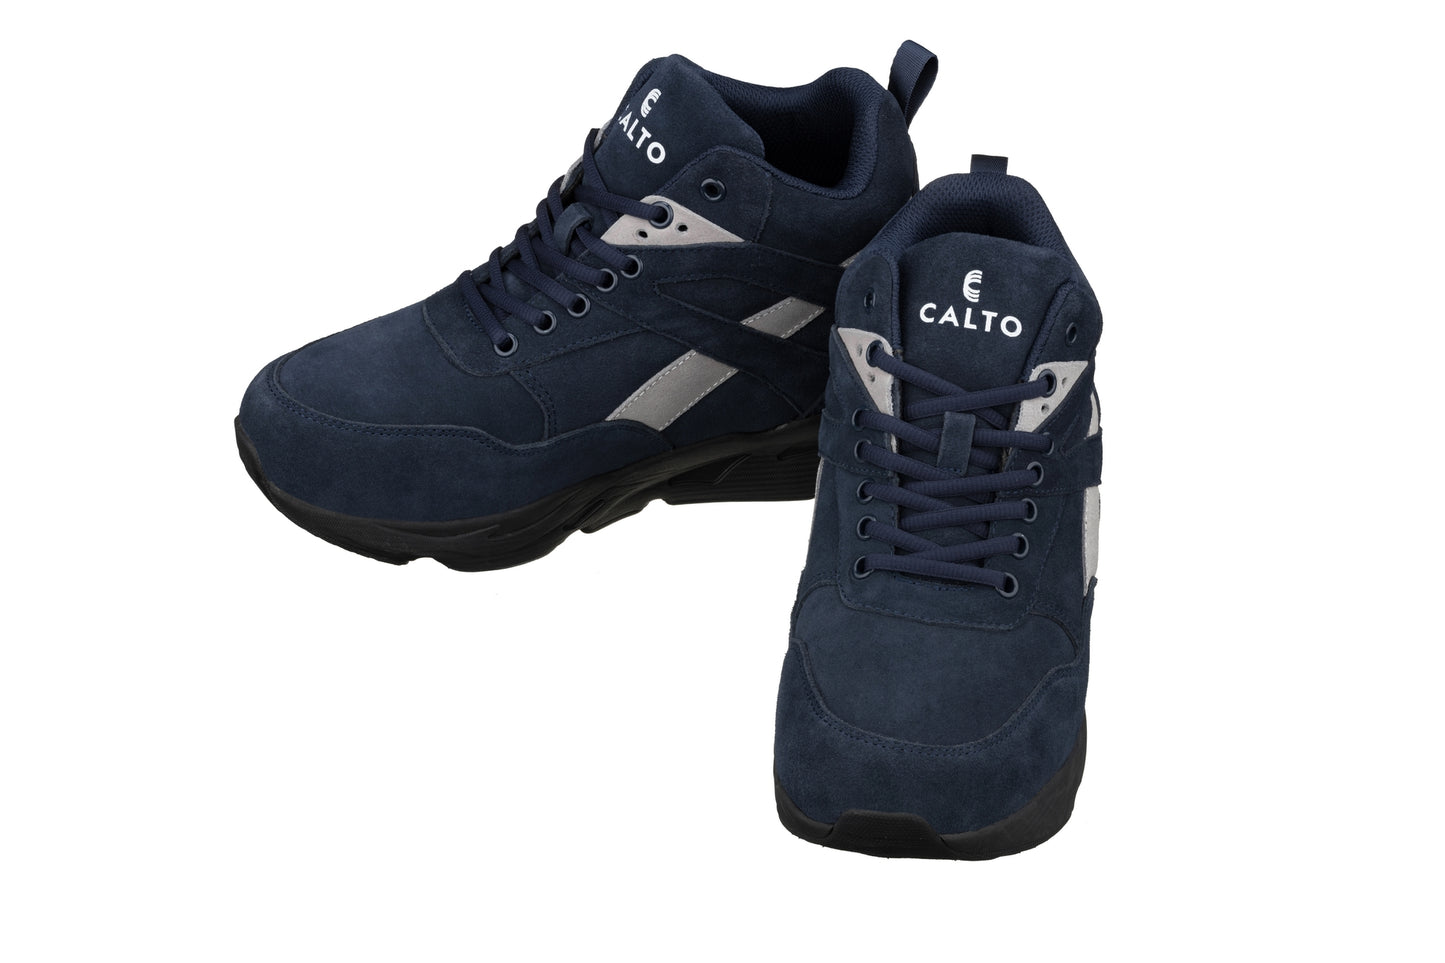 Elevator shoes height increase CALTO - S33595 - 4.0 Inches Taller (Blue/Grey) - Sneakers